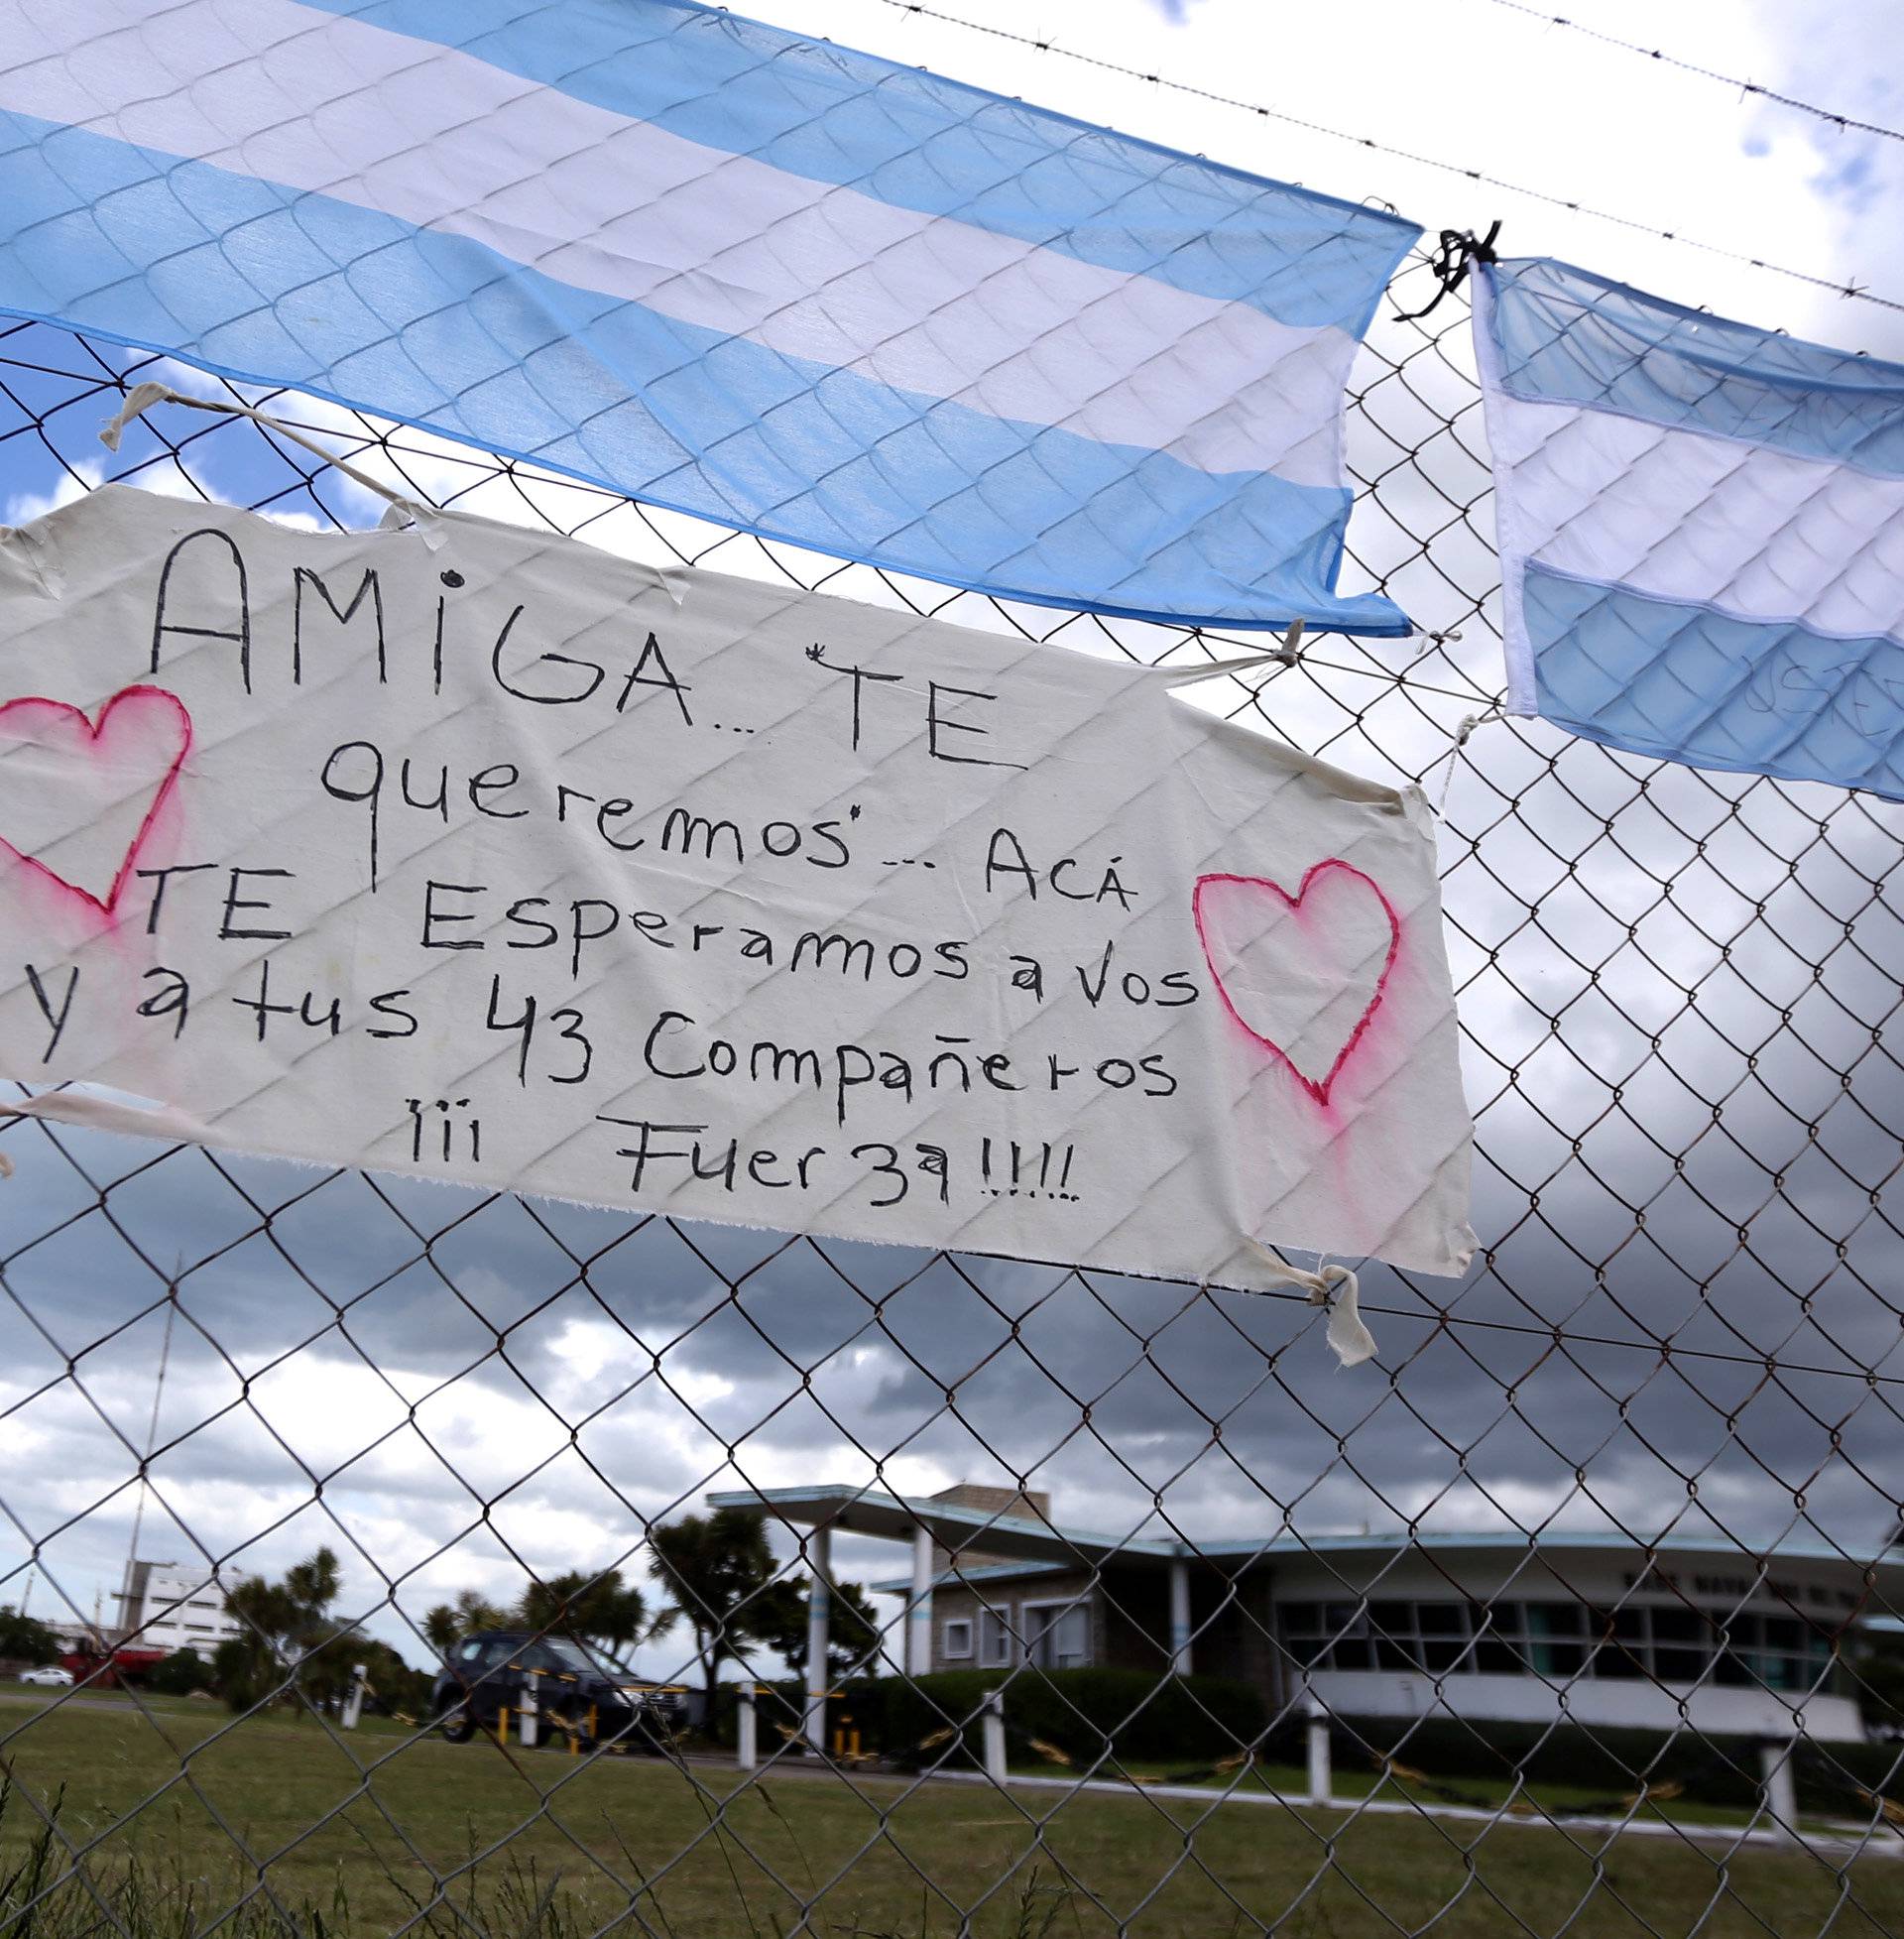 A sign in support of Krawczyk and other missing members of the  Argentine navy submarine ARA San Juan is displayed in Mar del Plata